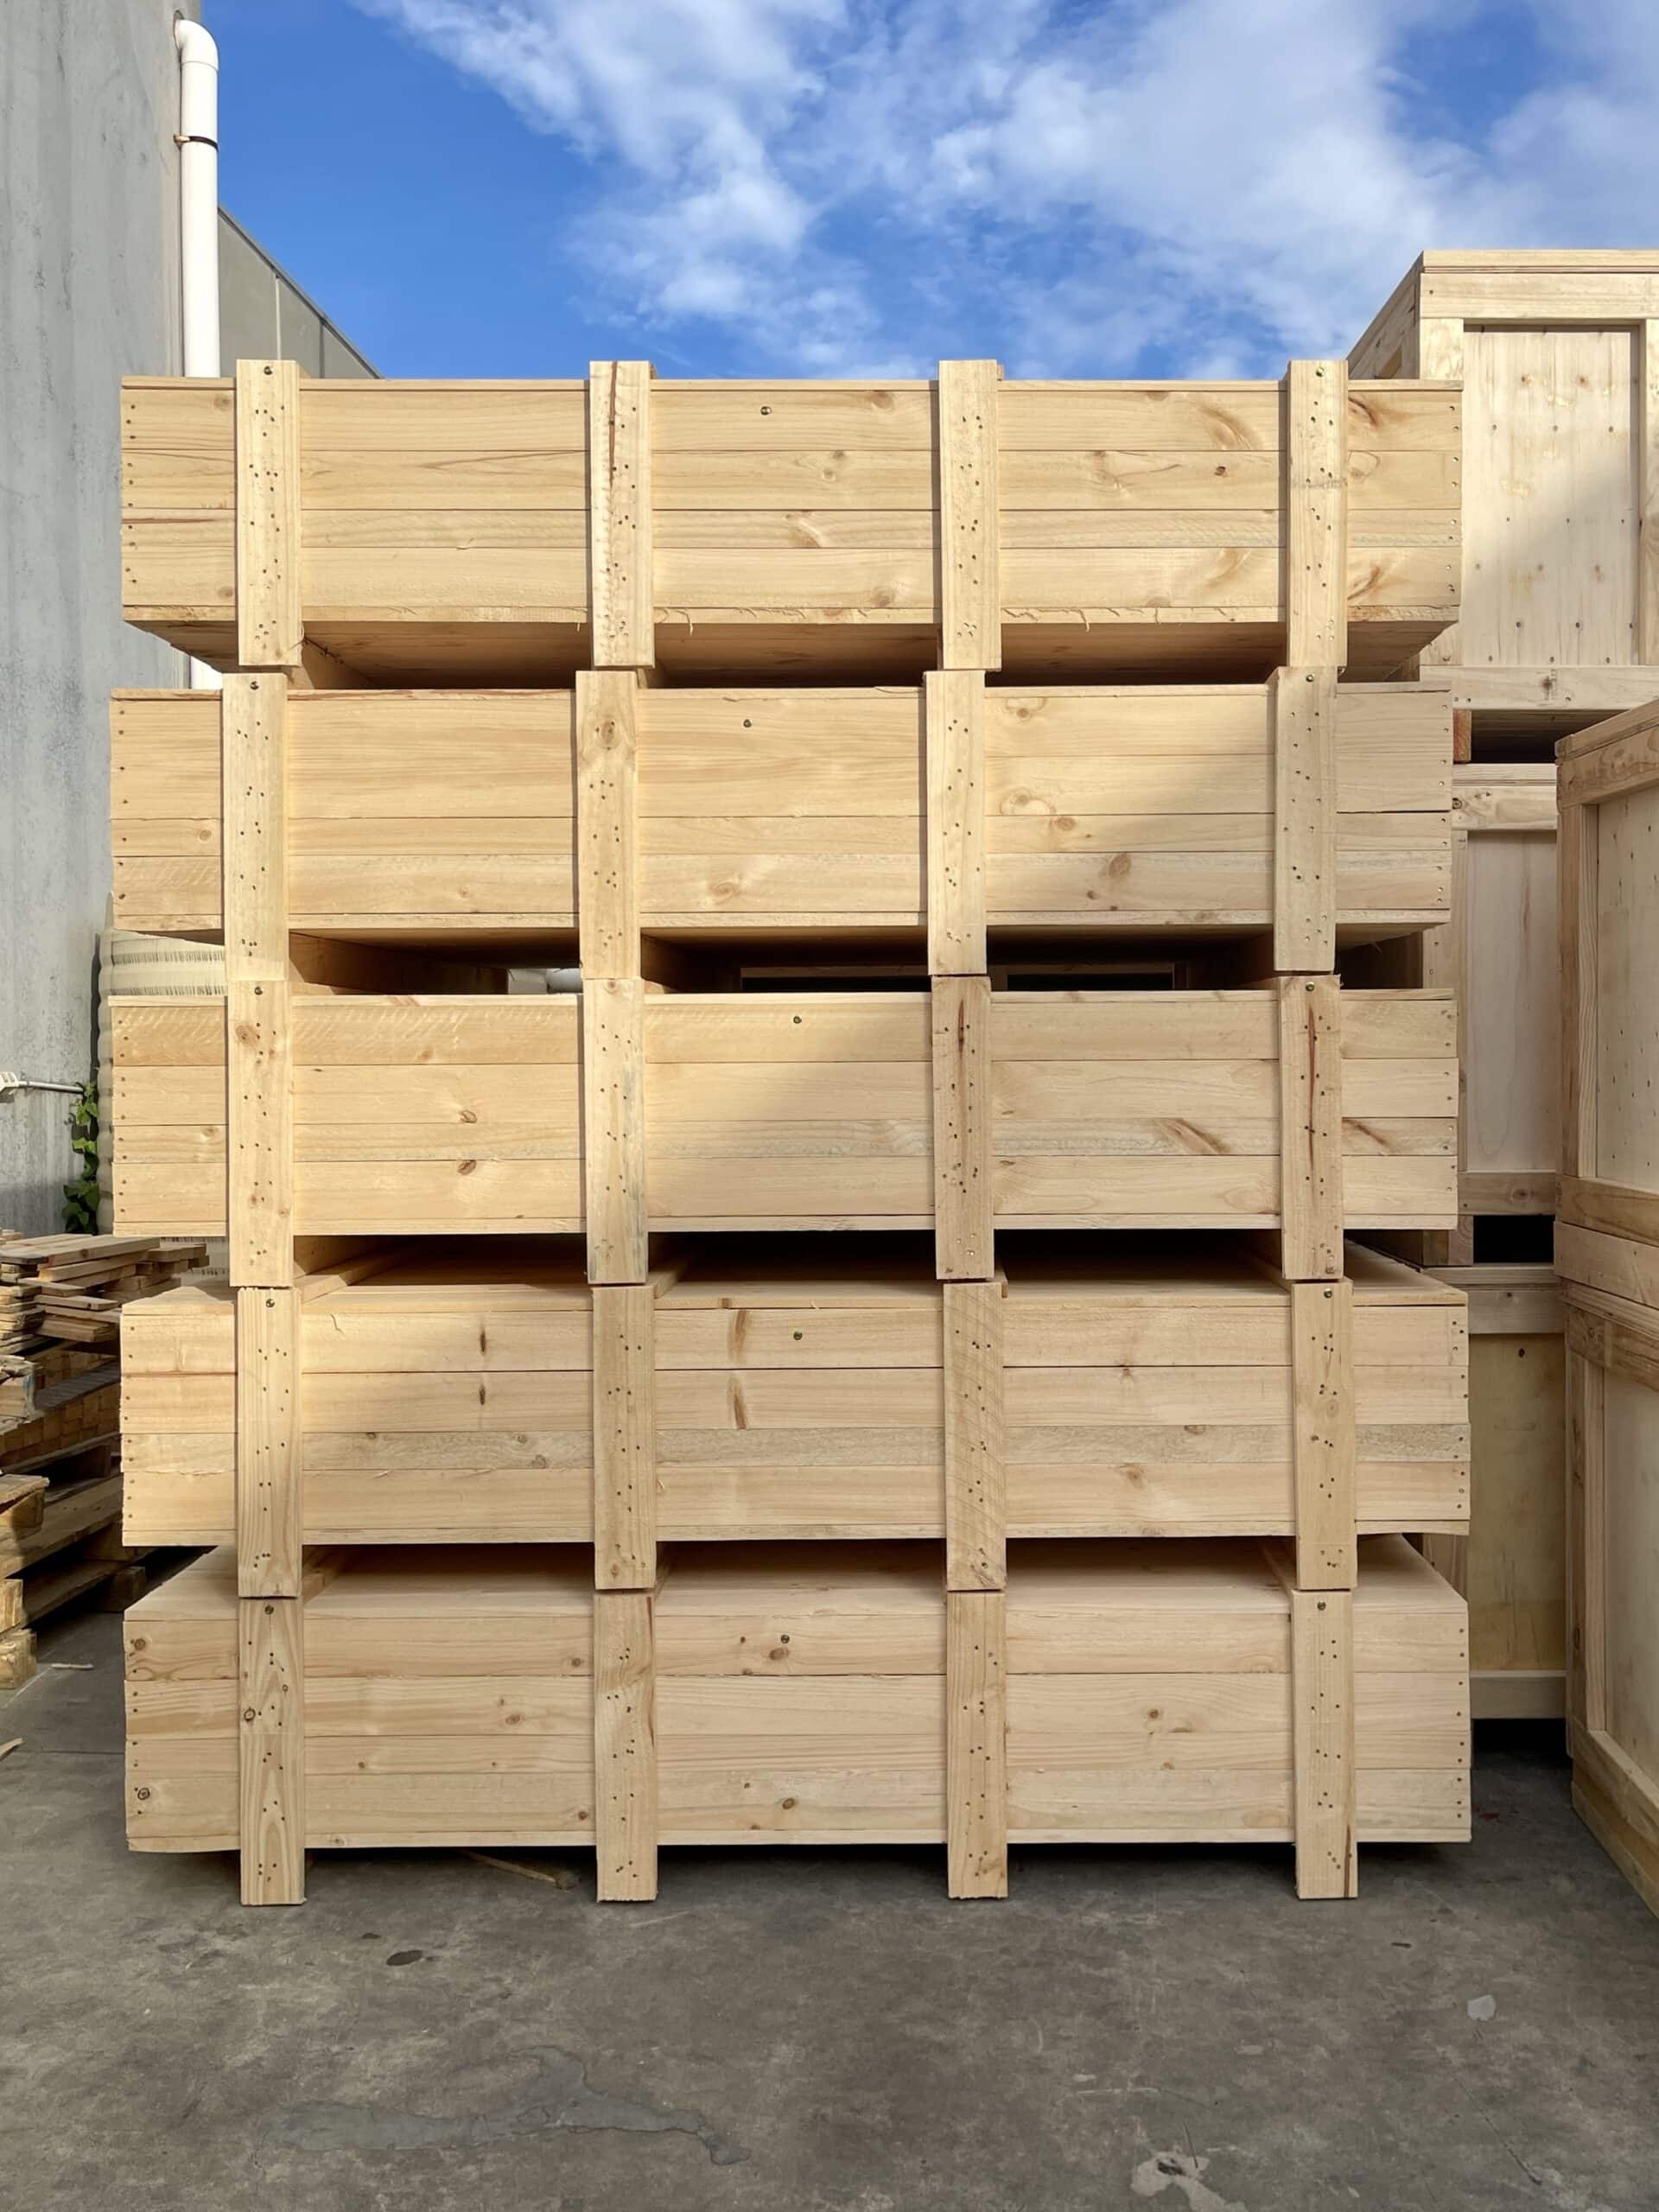 timber crates with crate n pack solutions logo in background